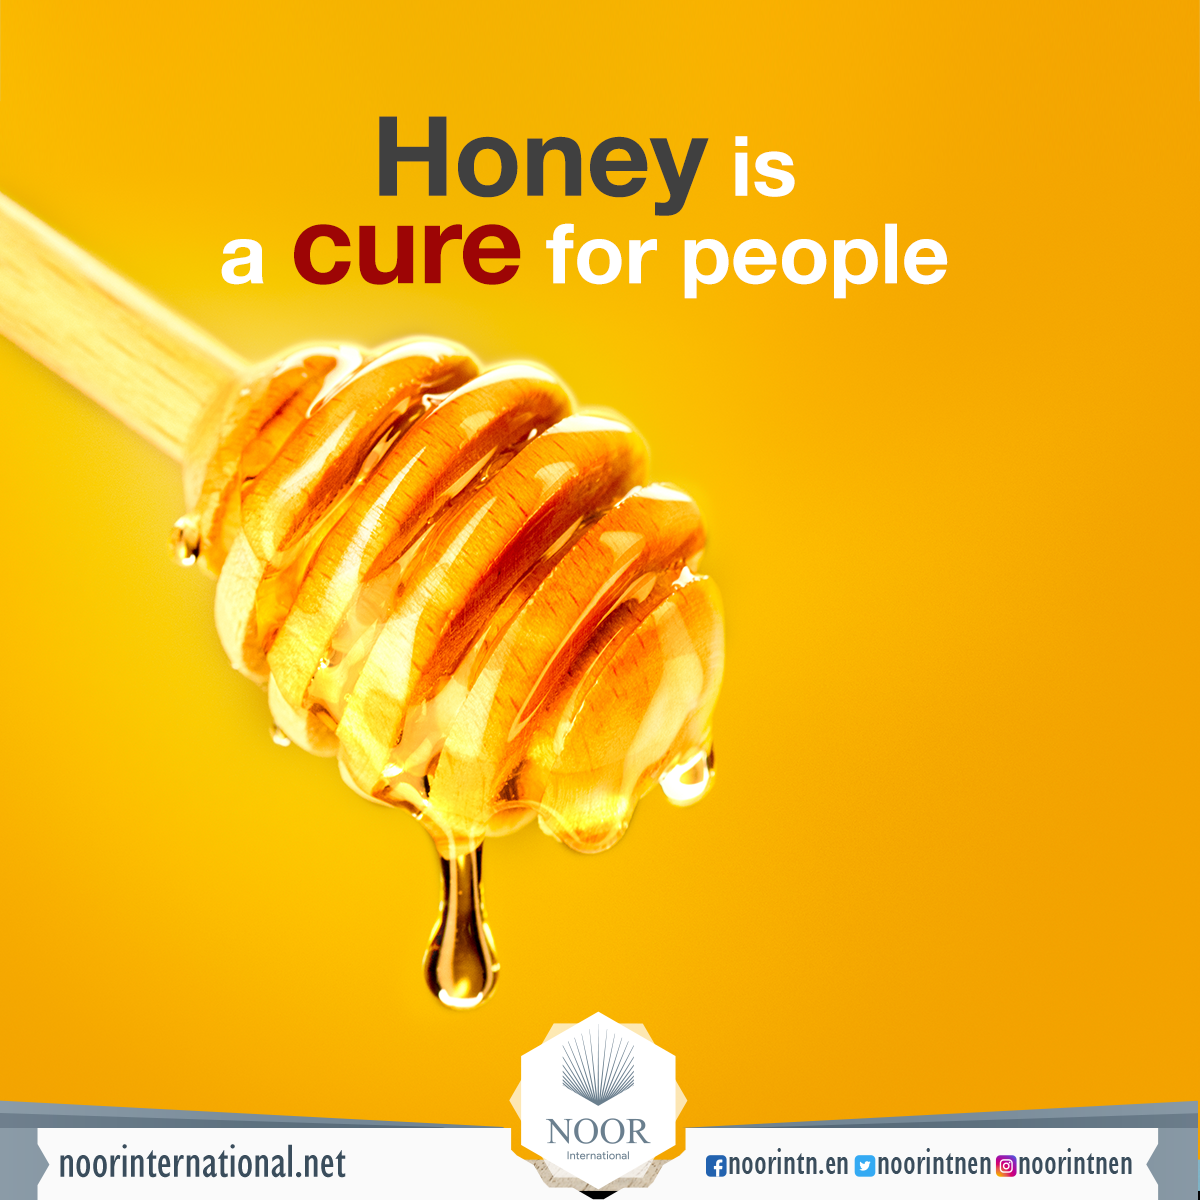 Honey is a cure for people